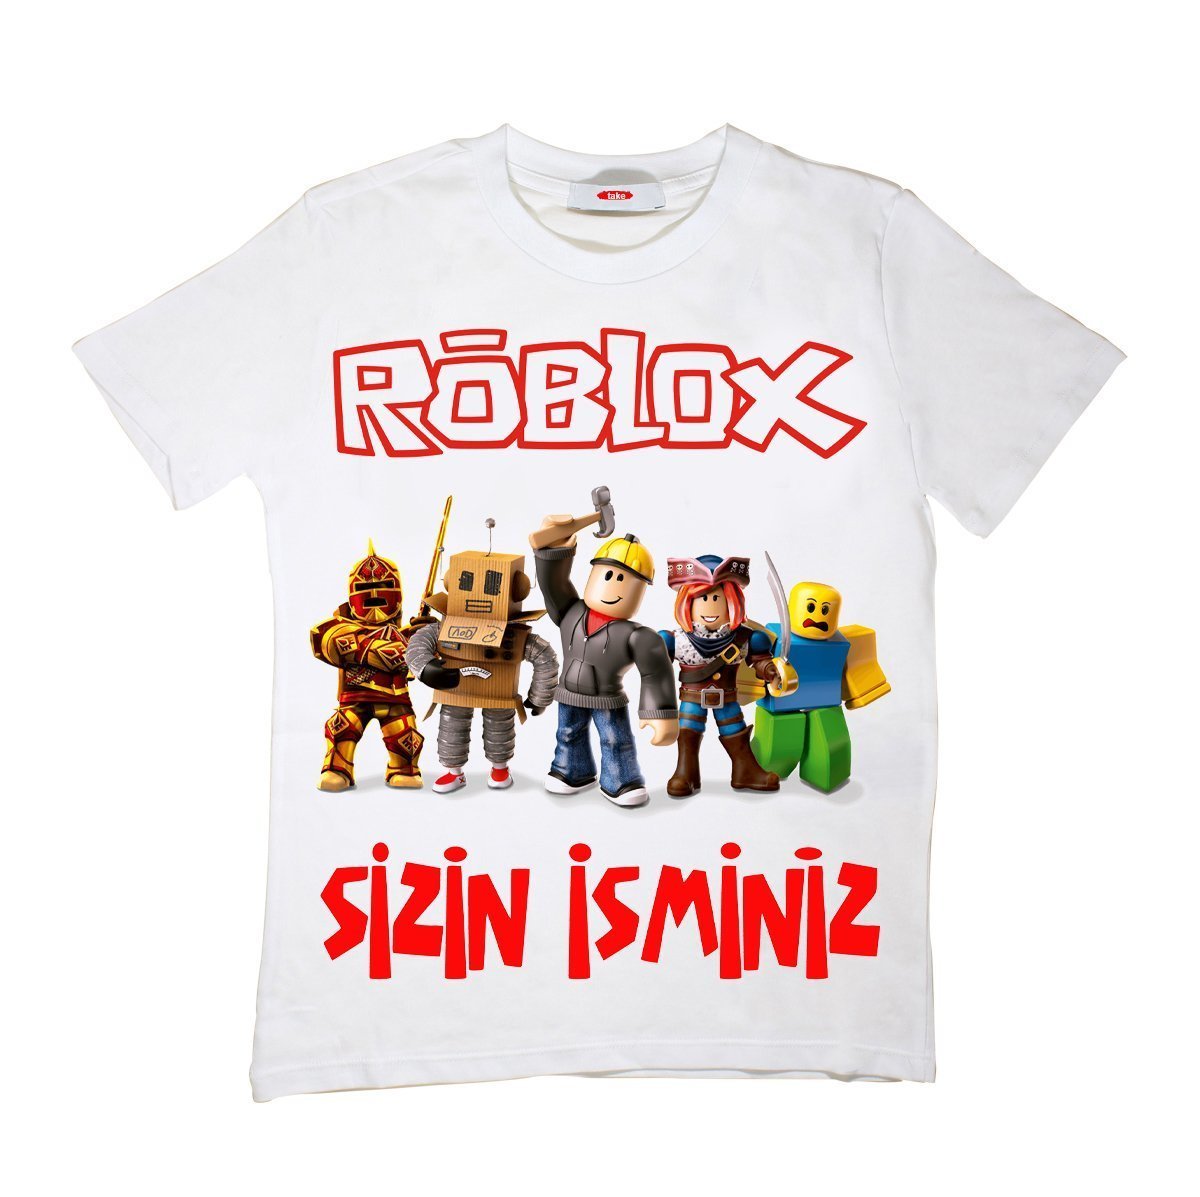 Isim Roblox - new robux shirt add me on roblox my name is crazykid12 1024x978